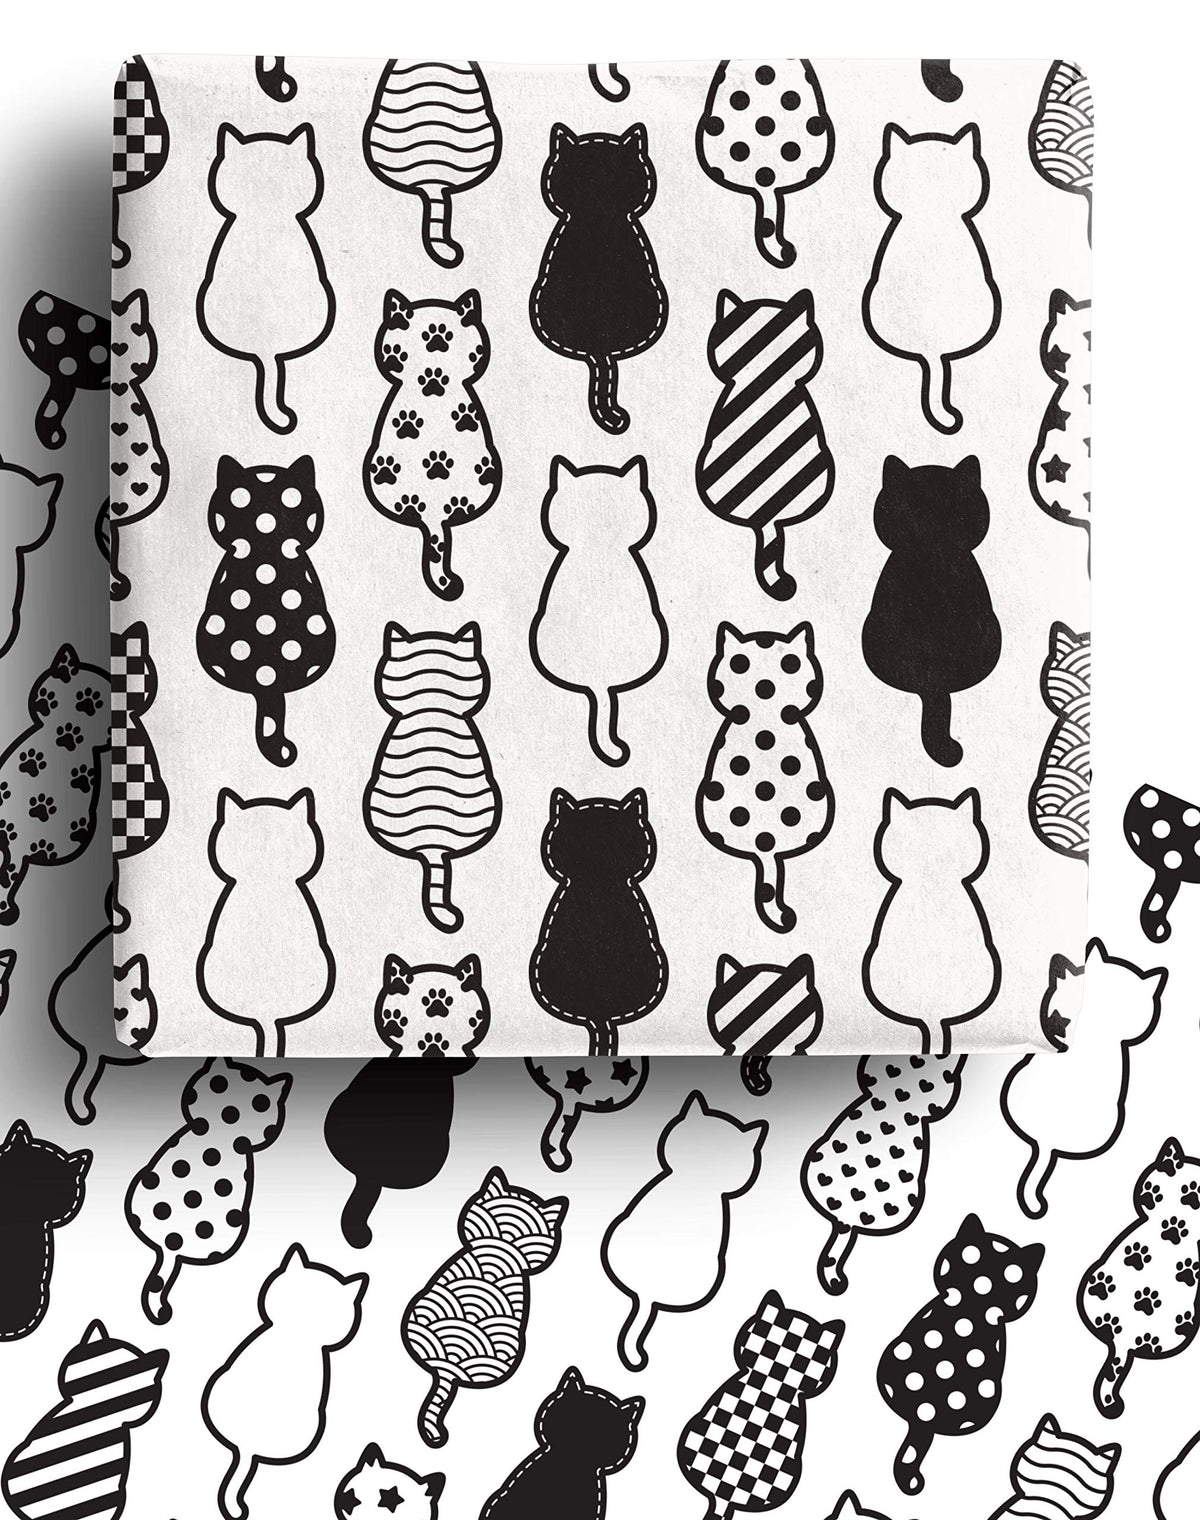 4 x Recyclable Cat Wrapping Paper Sheets 70cm x 50cm - Premium Black and White Gift Wrap - Made in the UK - 100% Recycled Eco Friendly Animal Gift Wrapping Paper